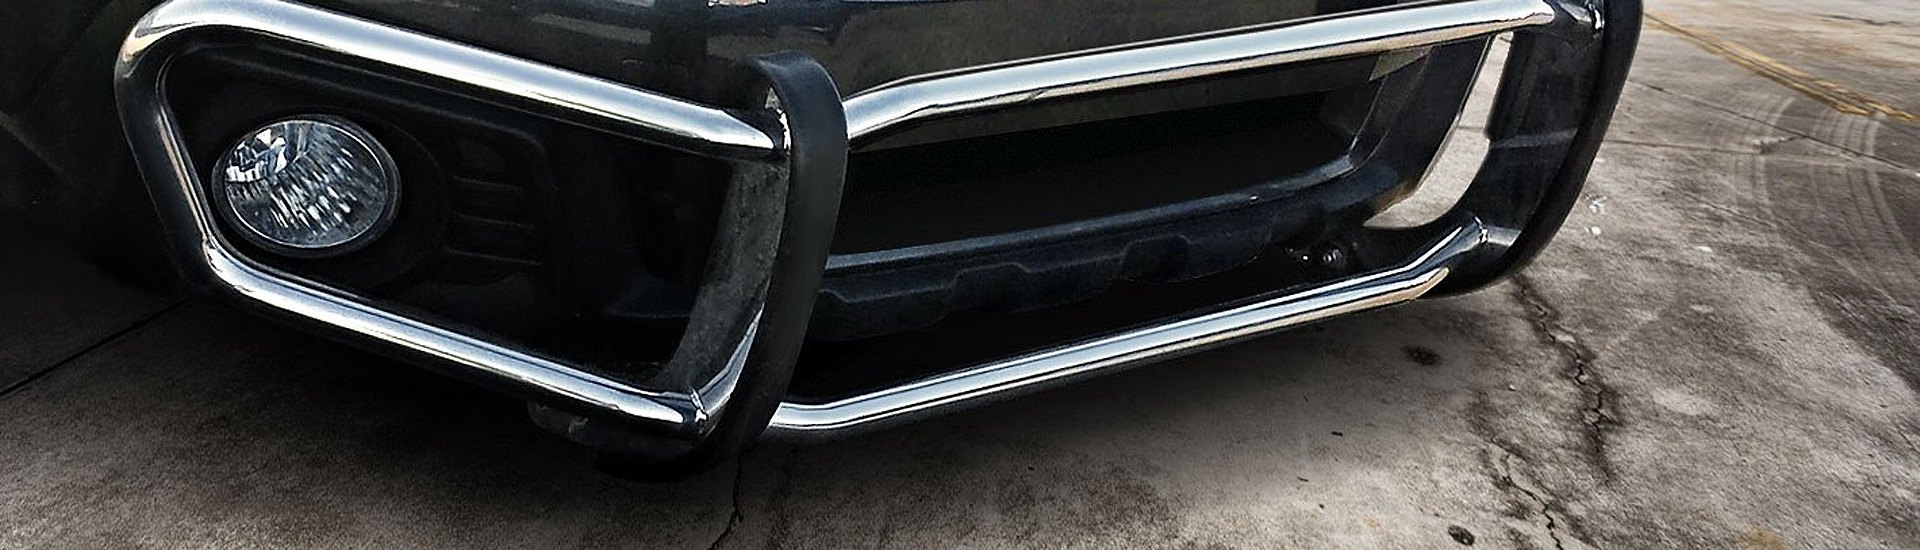 Bumper Guards: Full-Width Protection in the City and the Country